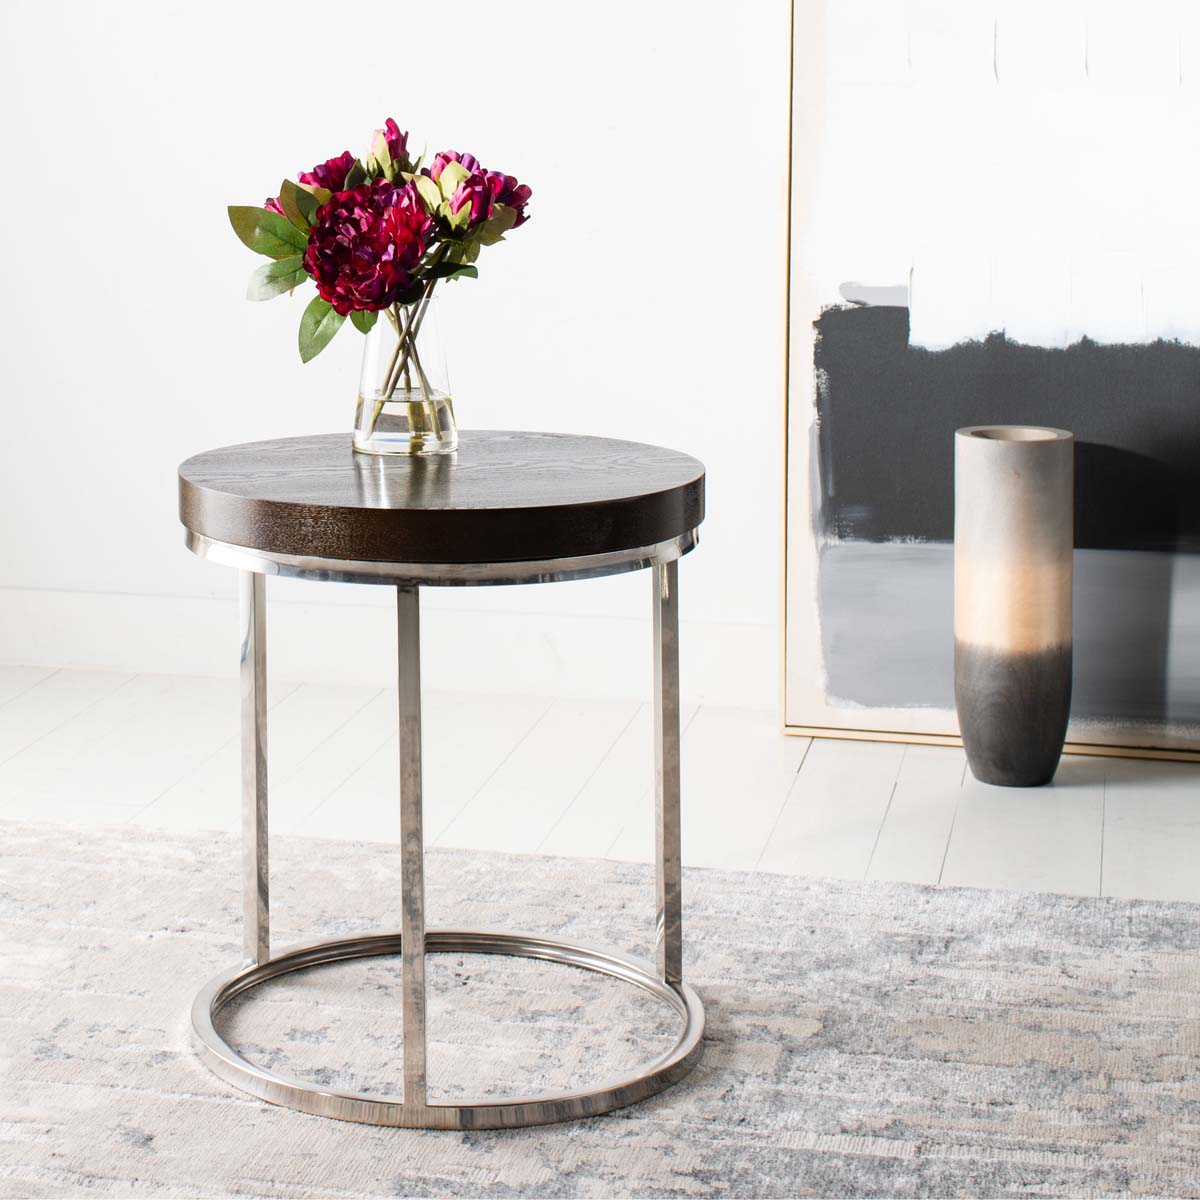 Safavieh Couture Turner Black Glass Top Round End Table